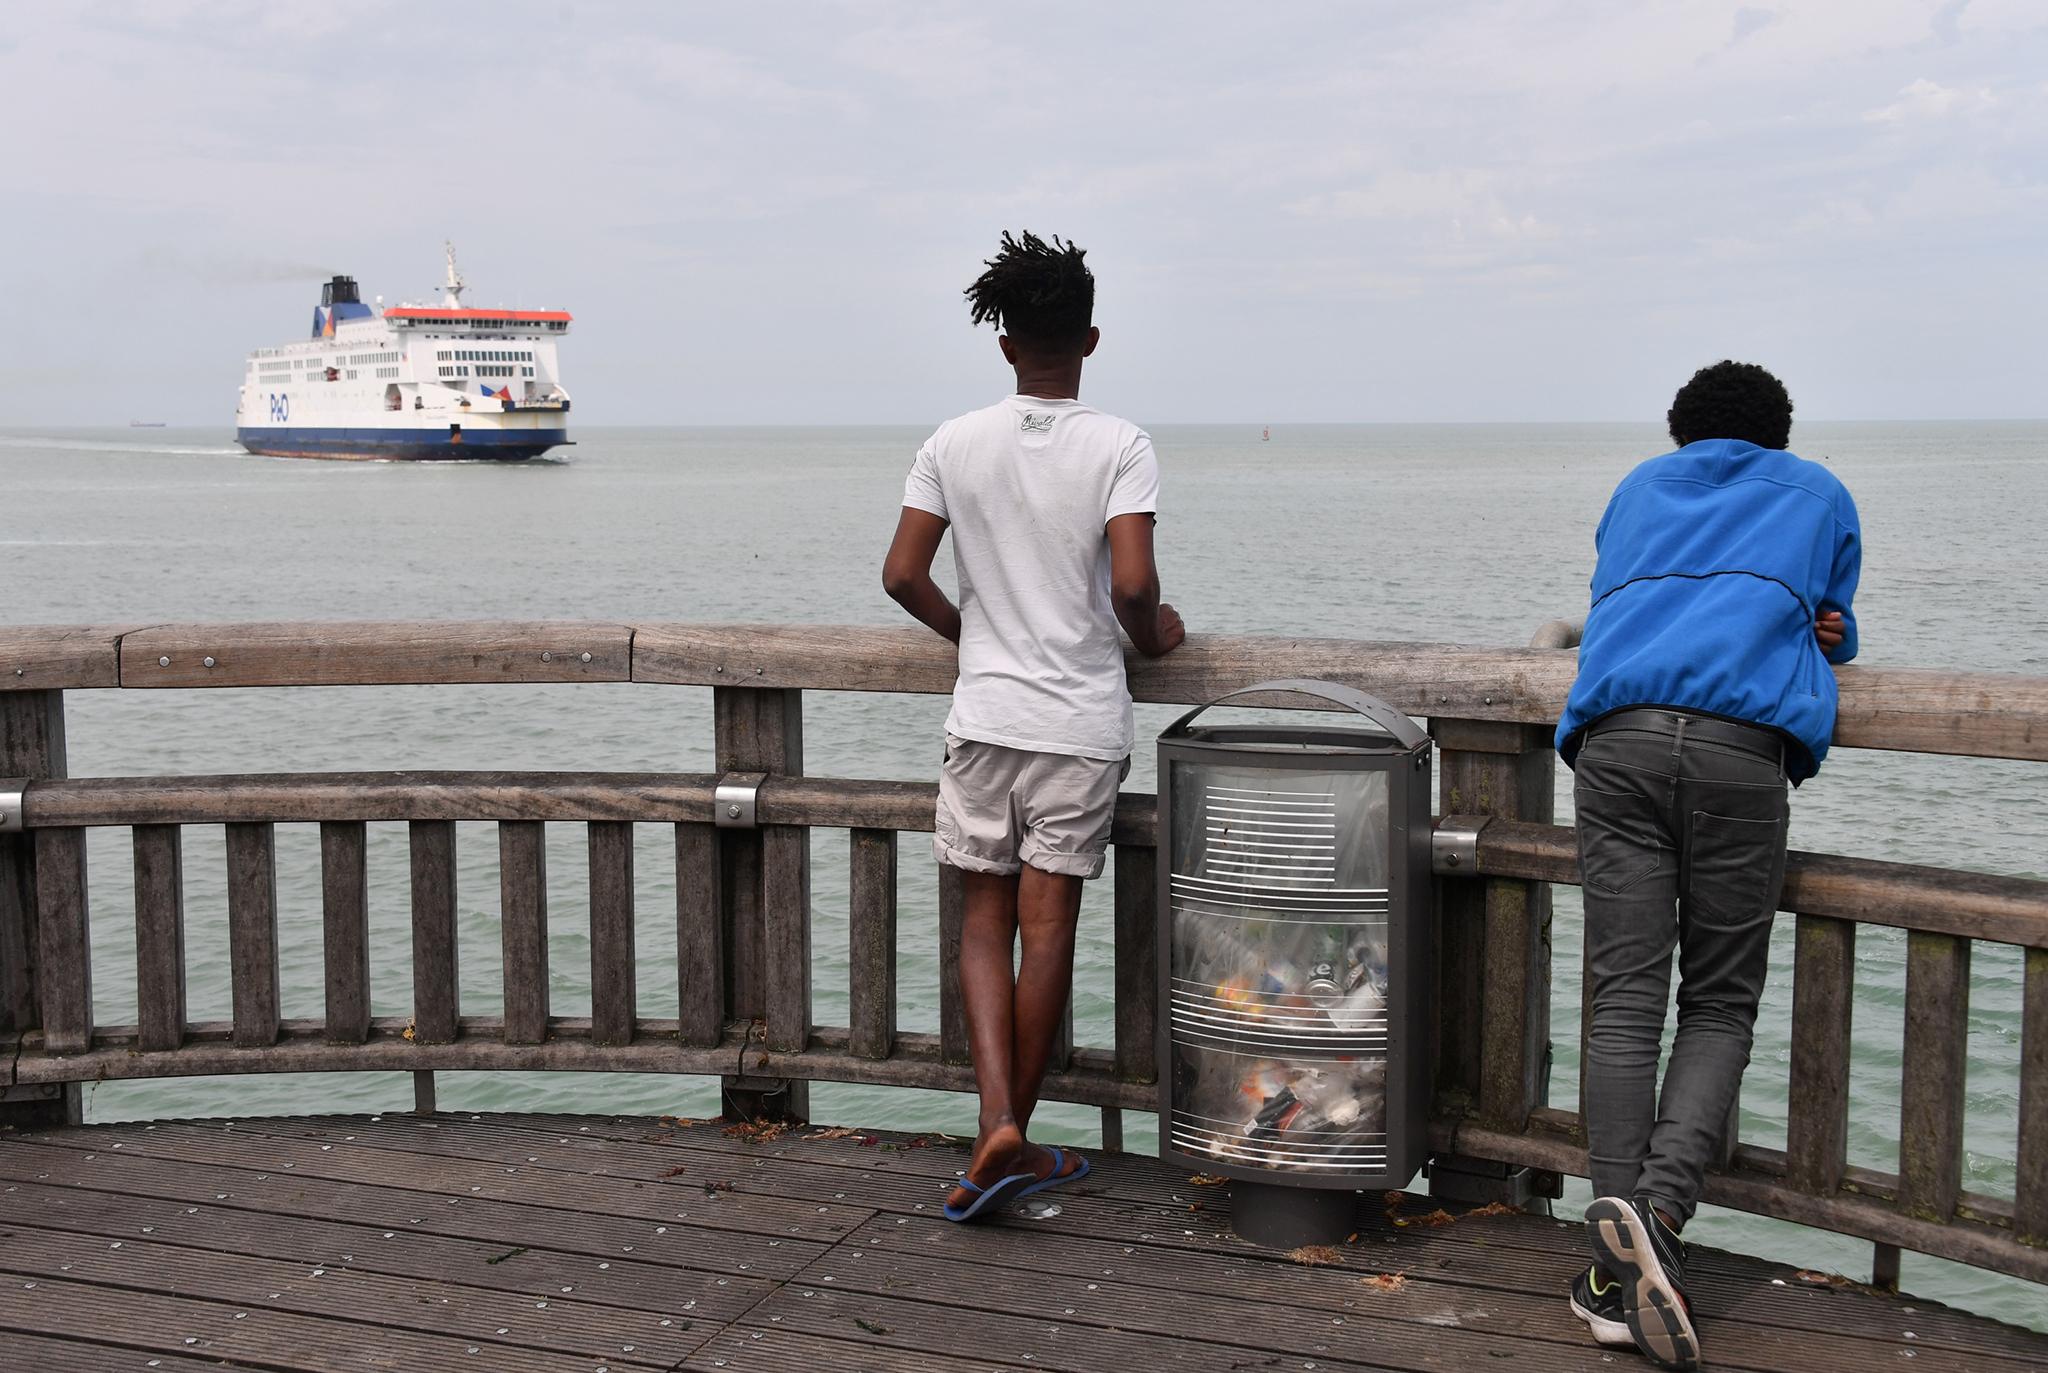 Eritrean migrants observe a ferry arriving in the French port from the UK this month